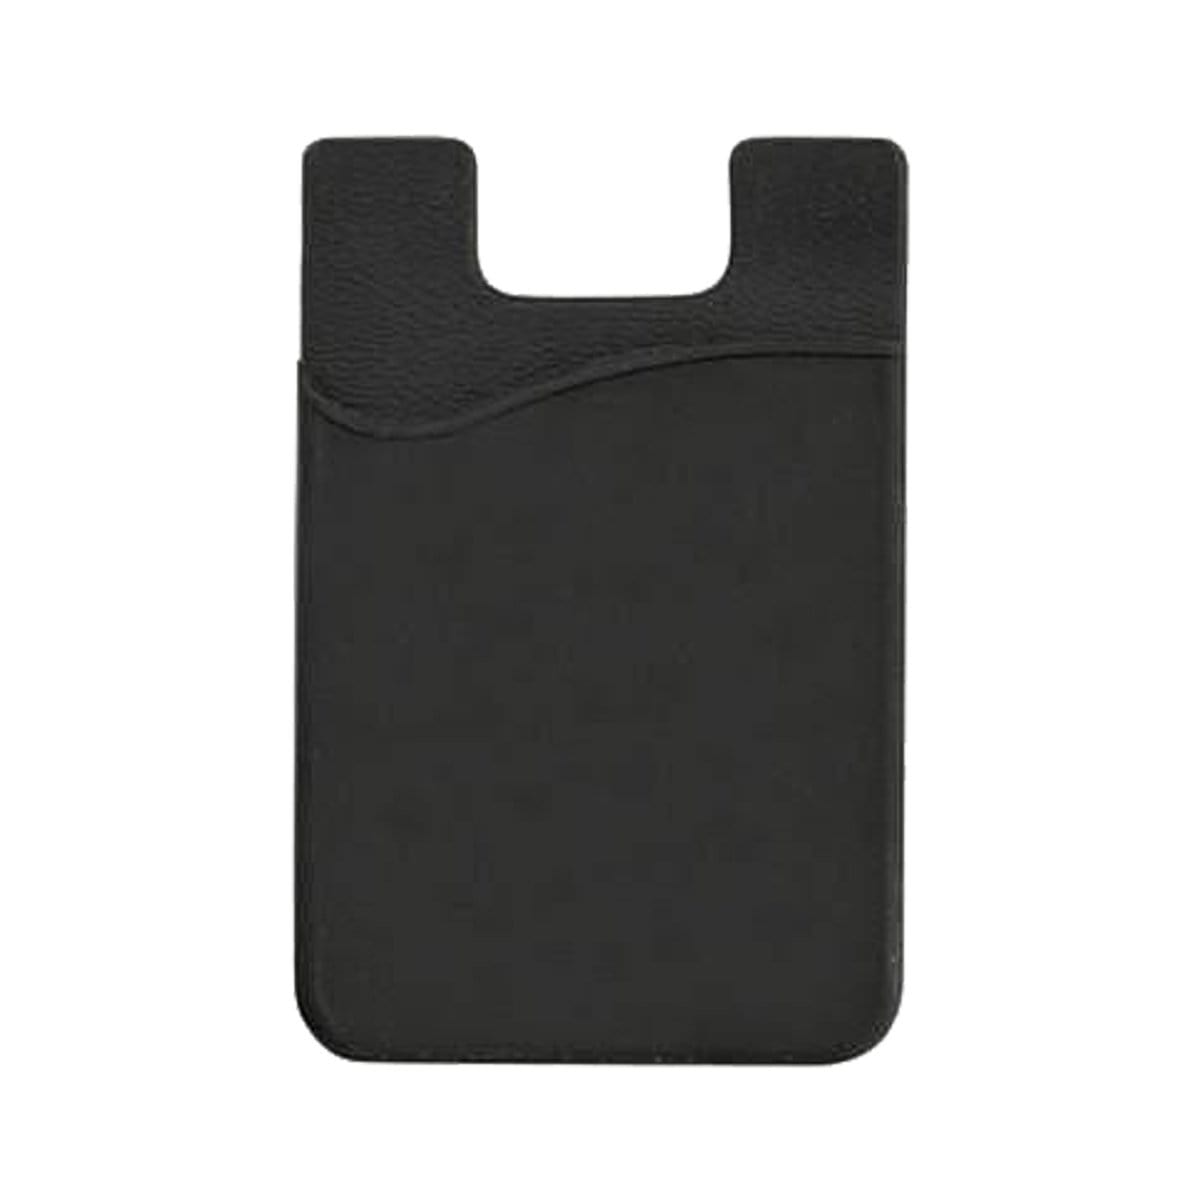 Black Silicone Cell Phone Wallet (SPID-050X) SPID-0501